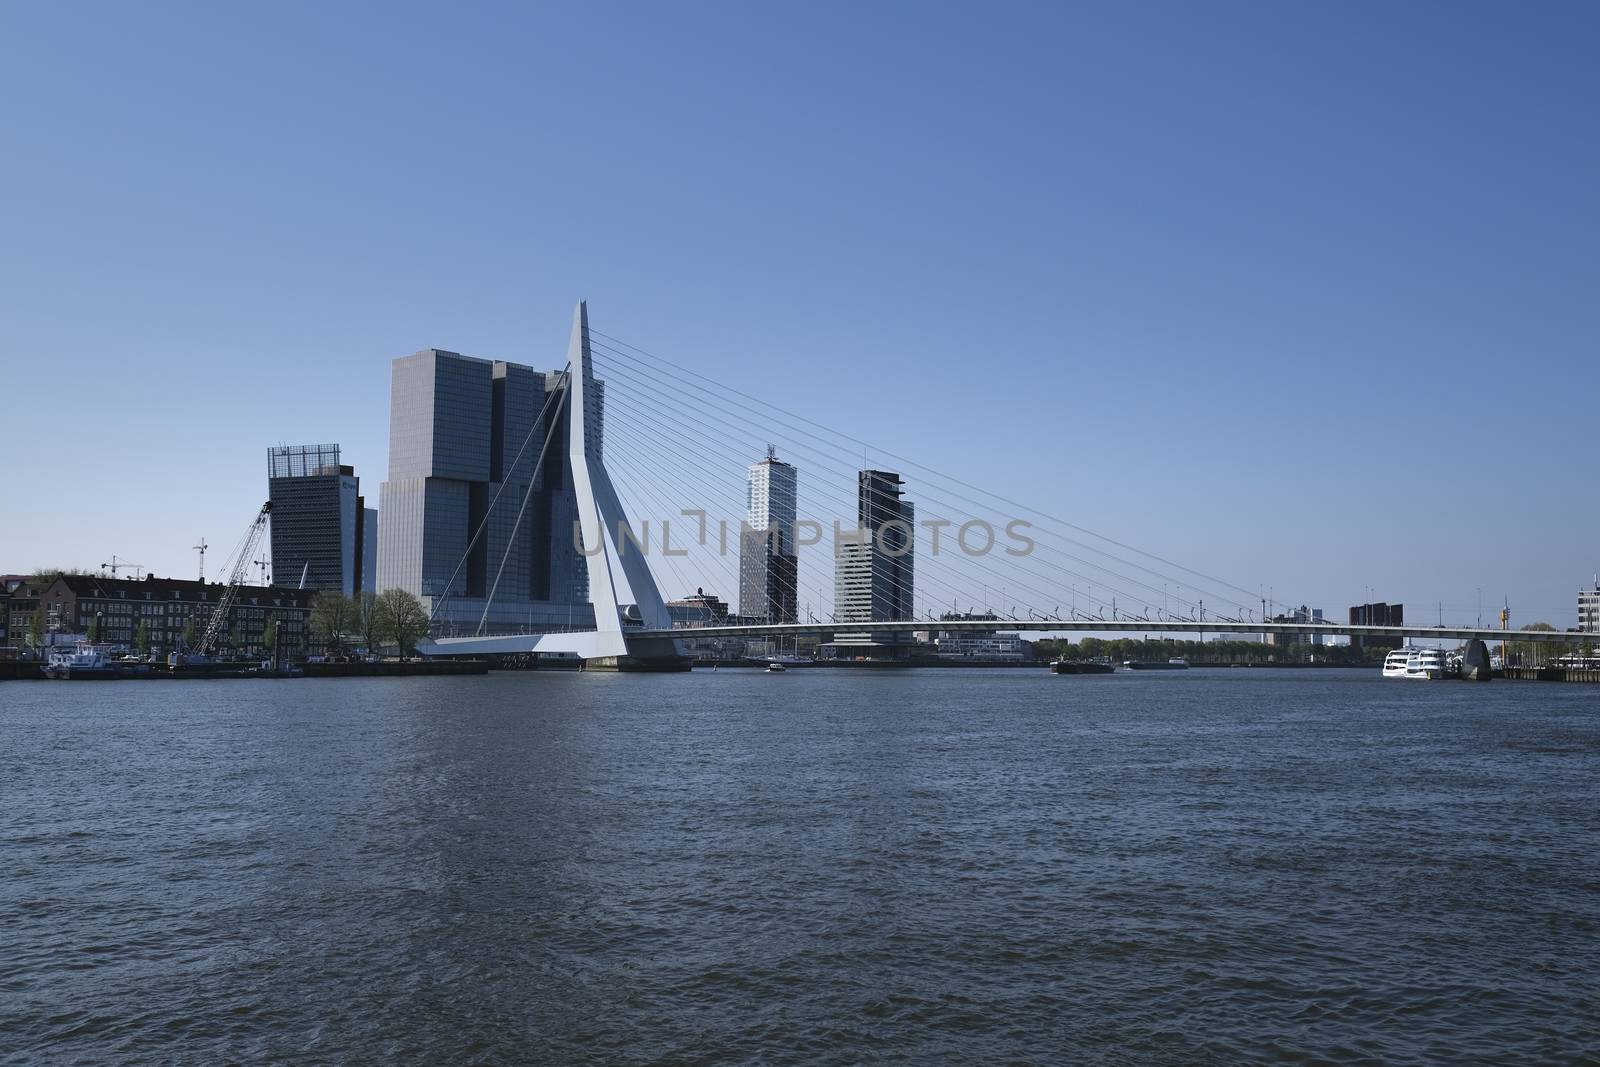 panoramic view of the Erasmus bridge in the city and buildings of Rotterdam in the Netherlands Holland